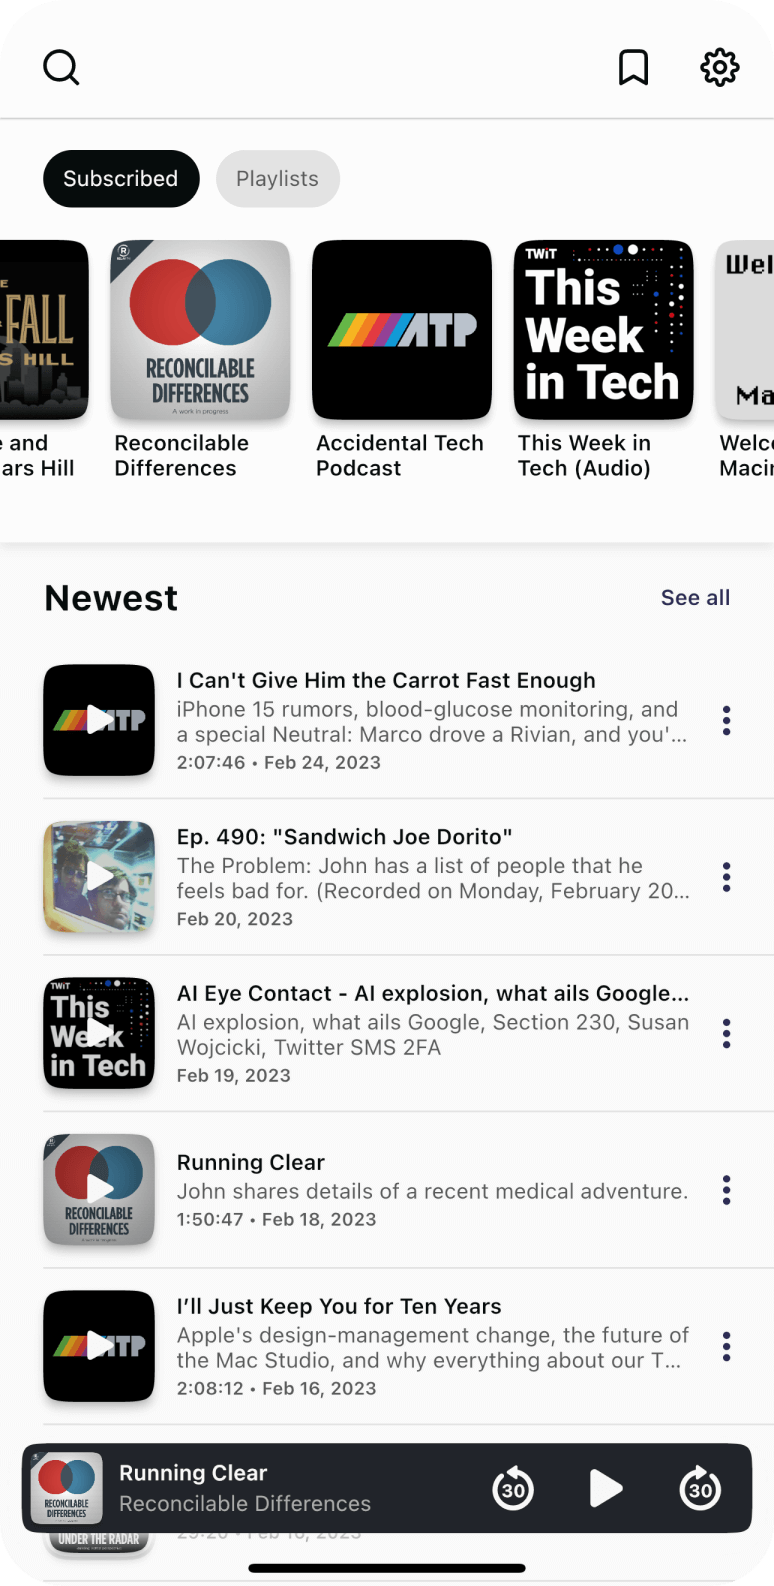 Castle app screenshot depicting the home screen of a podcast player app. It icons for popular podcasts such as Accidental Tech Podcast, This Week in Tech, and Reconcilable Differences displayed.